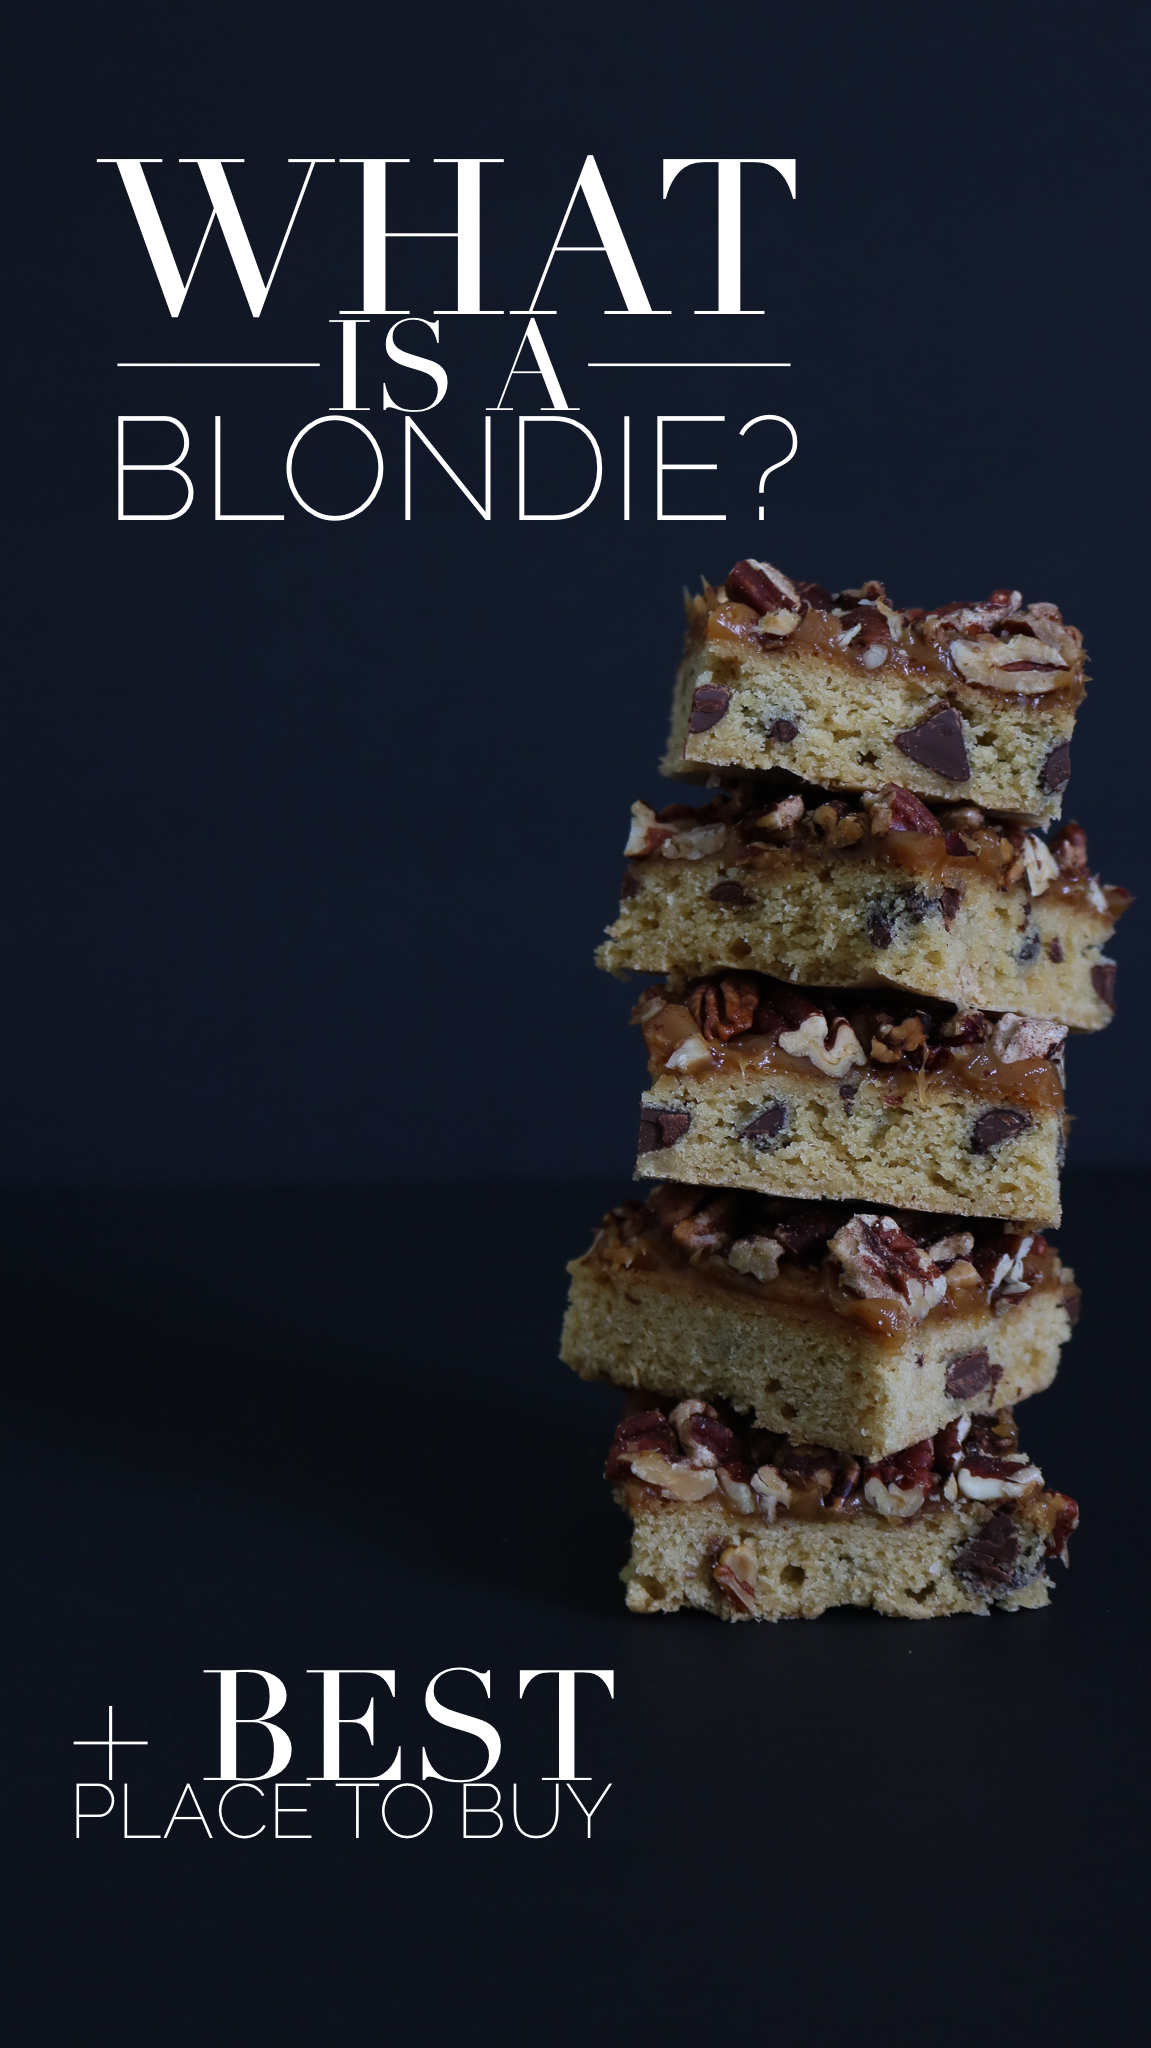 What are blondies?